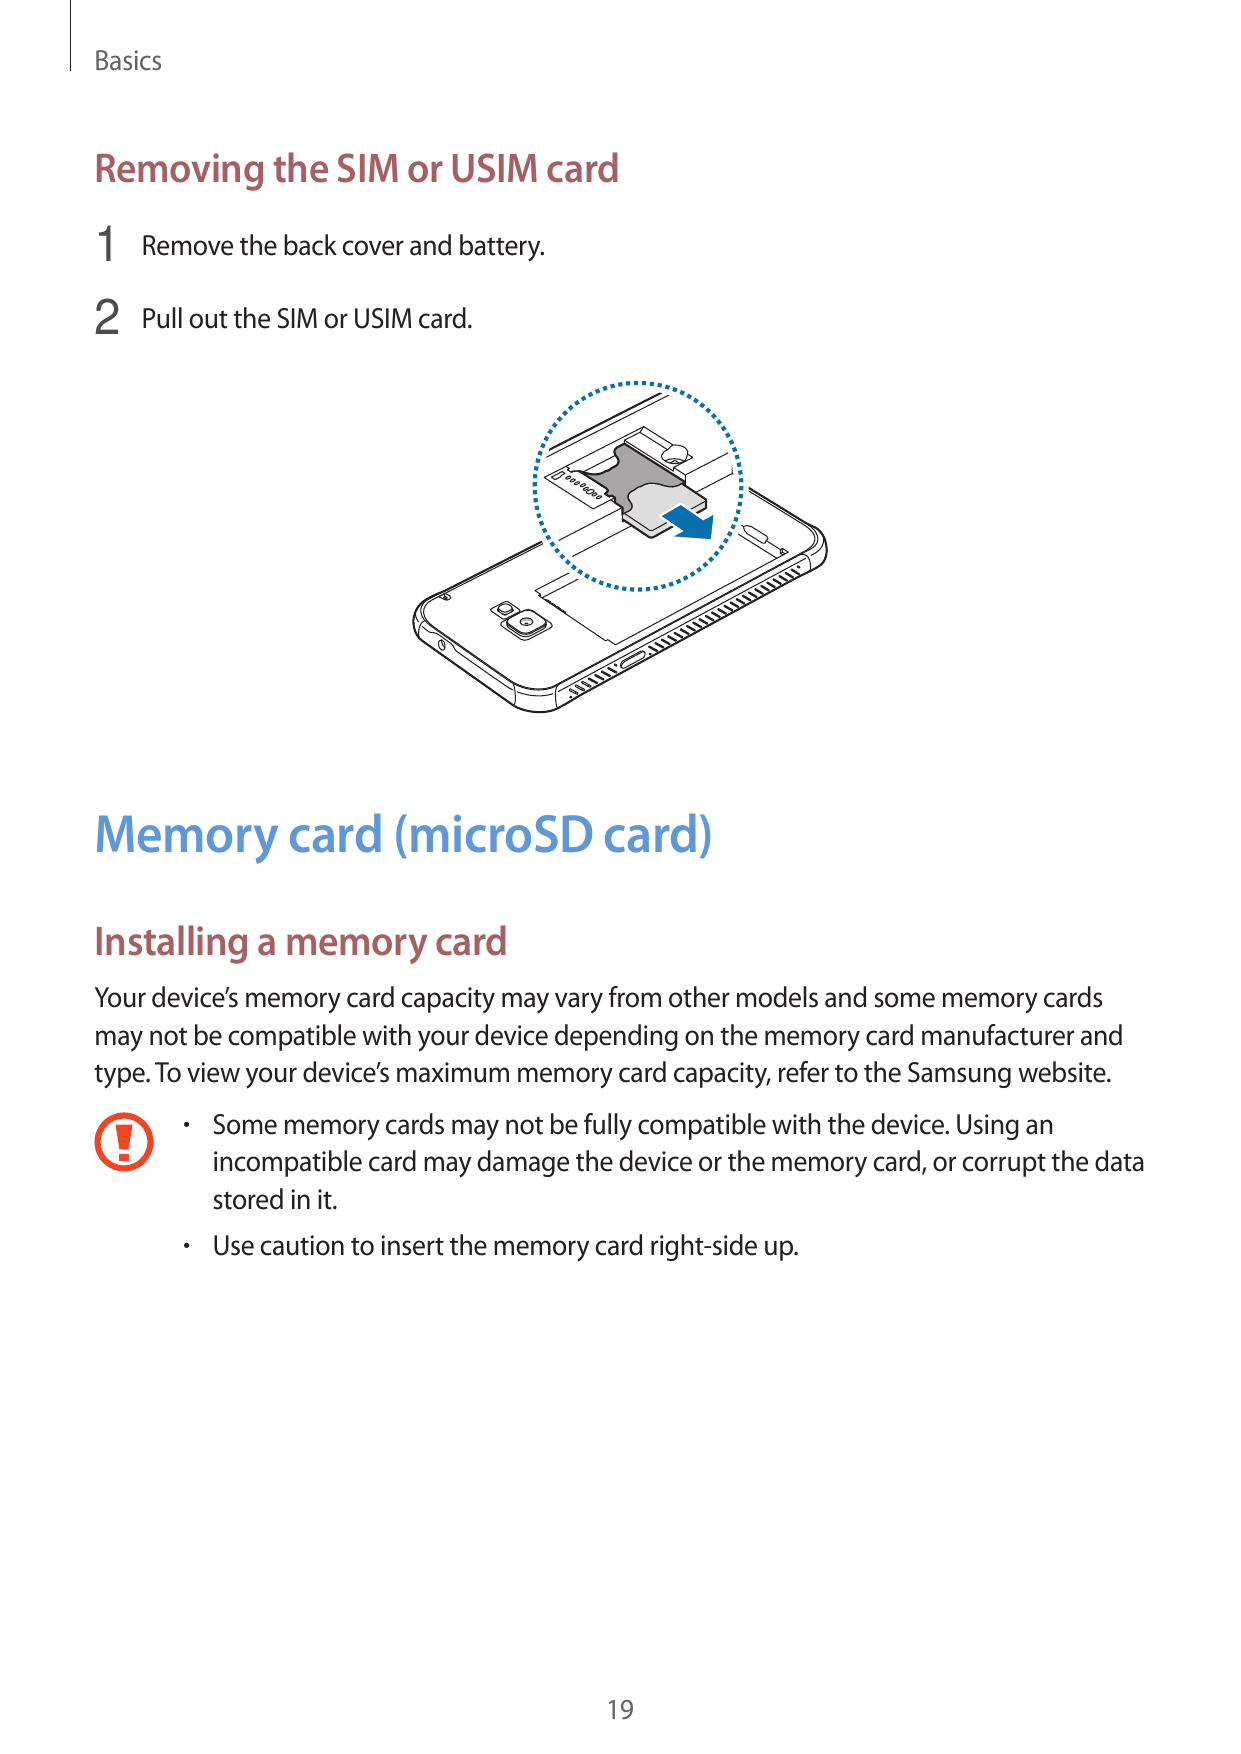 BasicsRemoving the SIM or USIM card1 Remove the back cover and battery.2 Pull out the SIM or USIM card.Memory card (microSD card